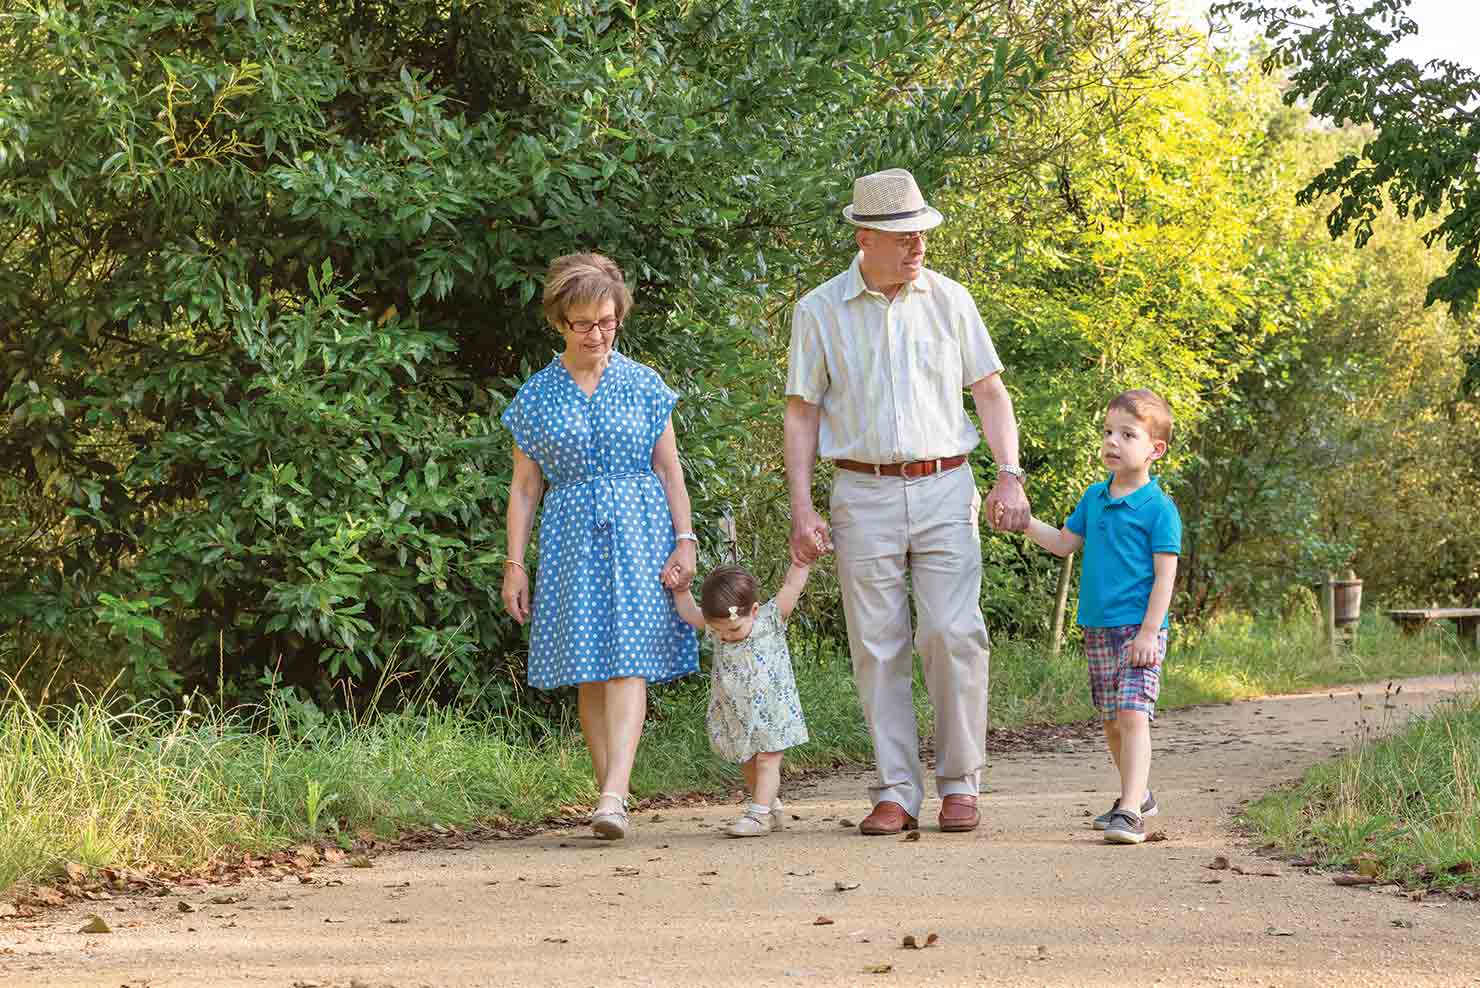 grandparents walking hand in hand with their grandkids guaranteed retirement income